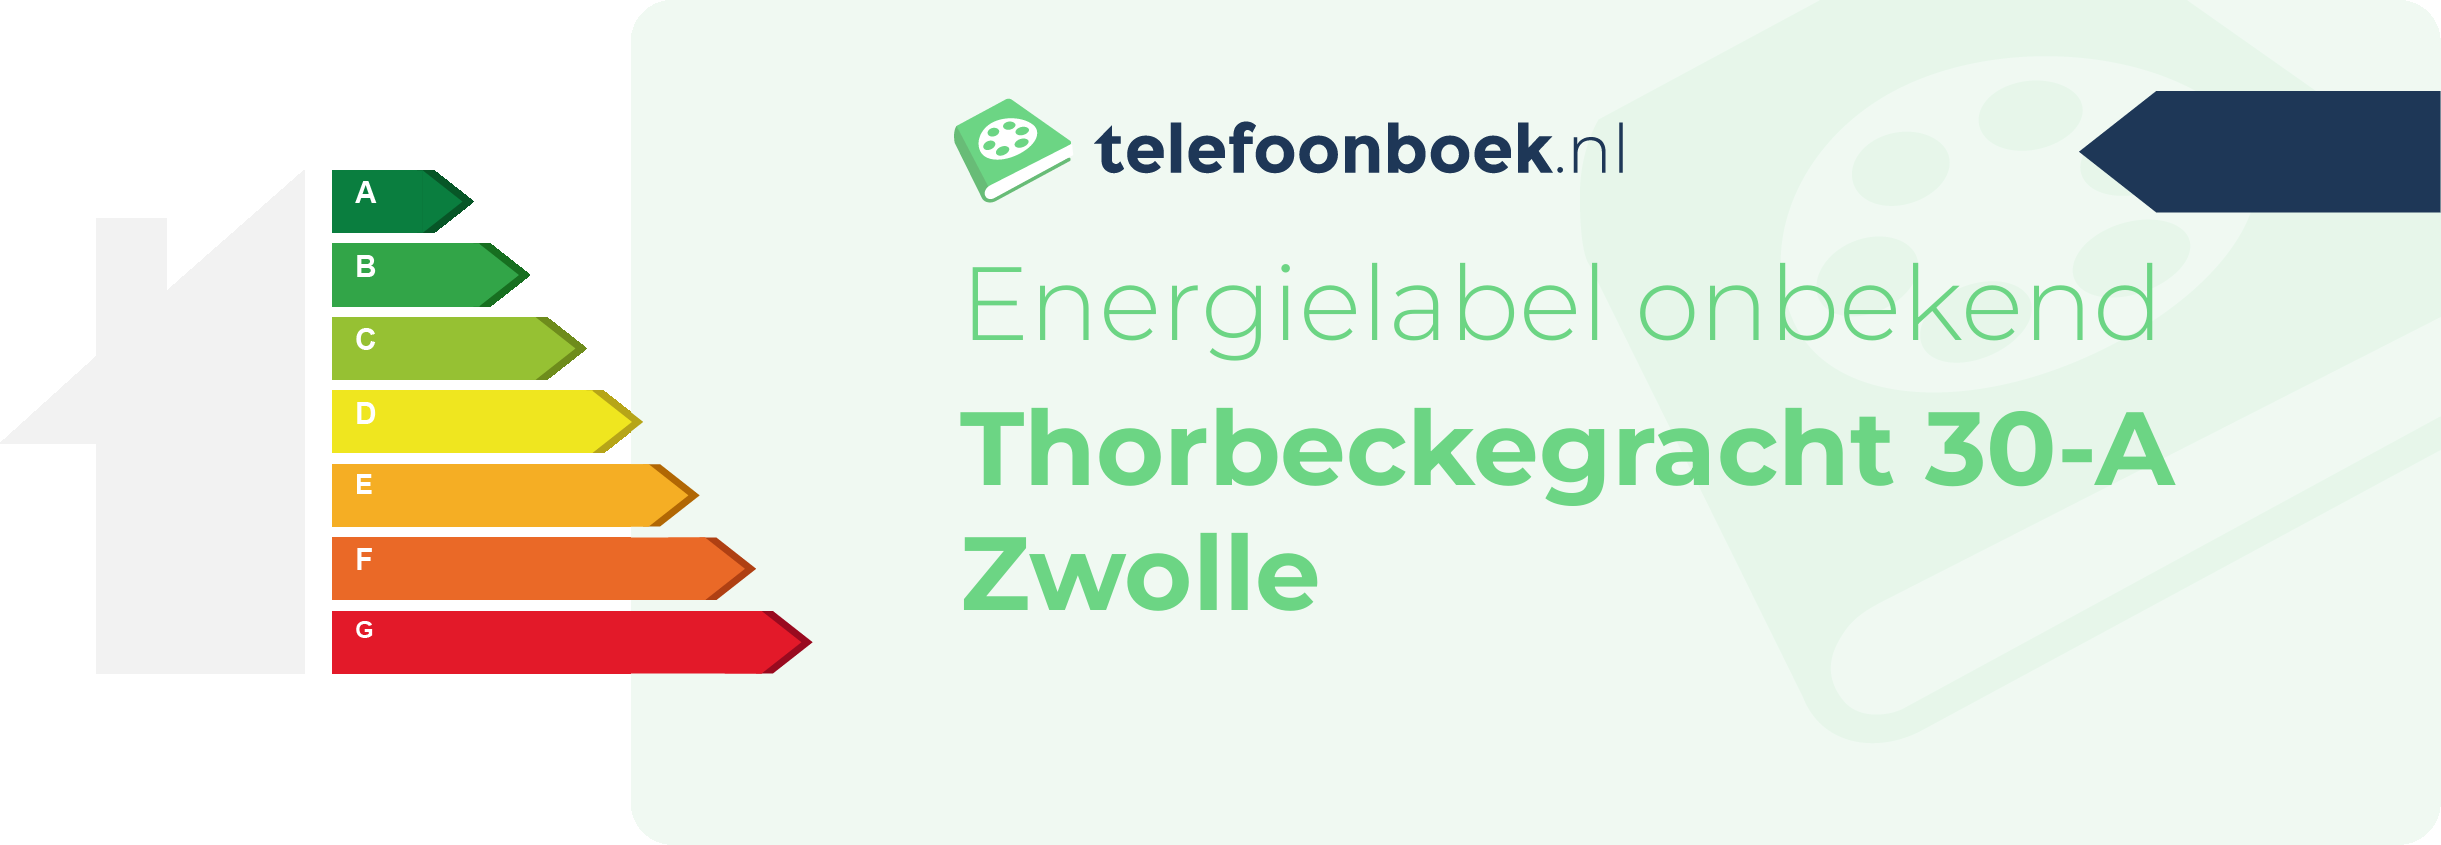 Energielabel Thorbeckegracht 30-A Zwolle